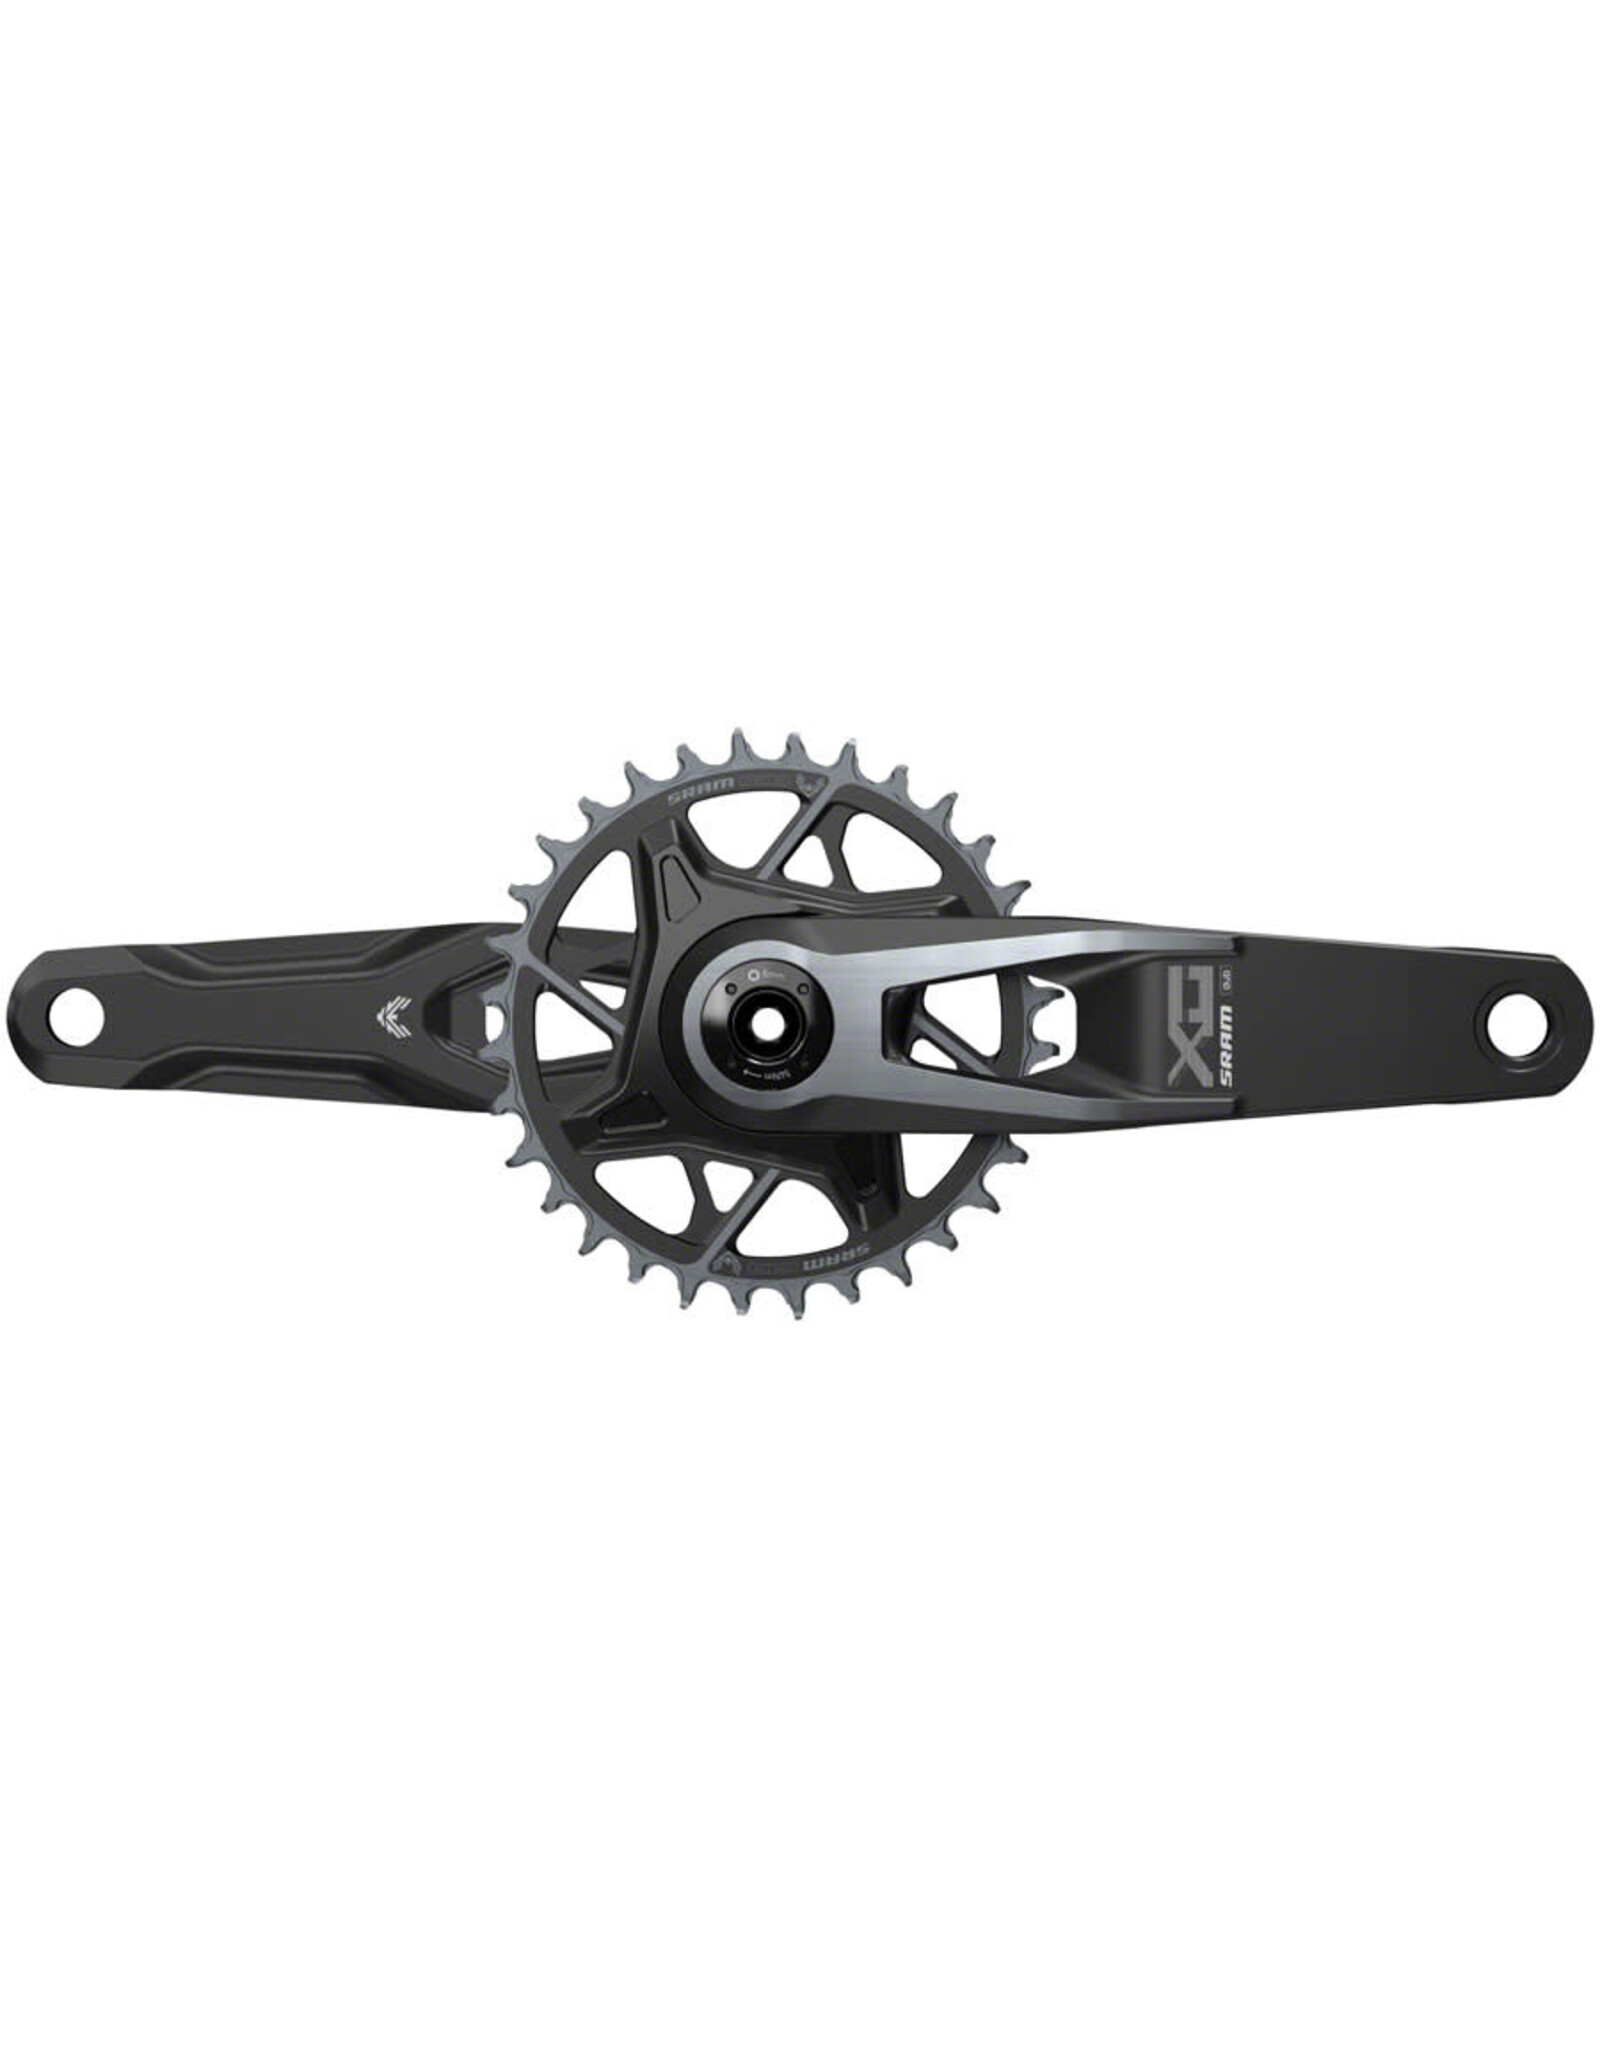 SRAM SRAM X0 Eagle T-Type Wide Crankset - 170mm, 12-Speed, 32t Chainring, Direct Mount, 2-Guards, DUB Spindle Interface, Black